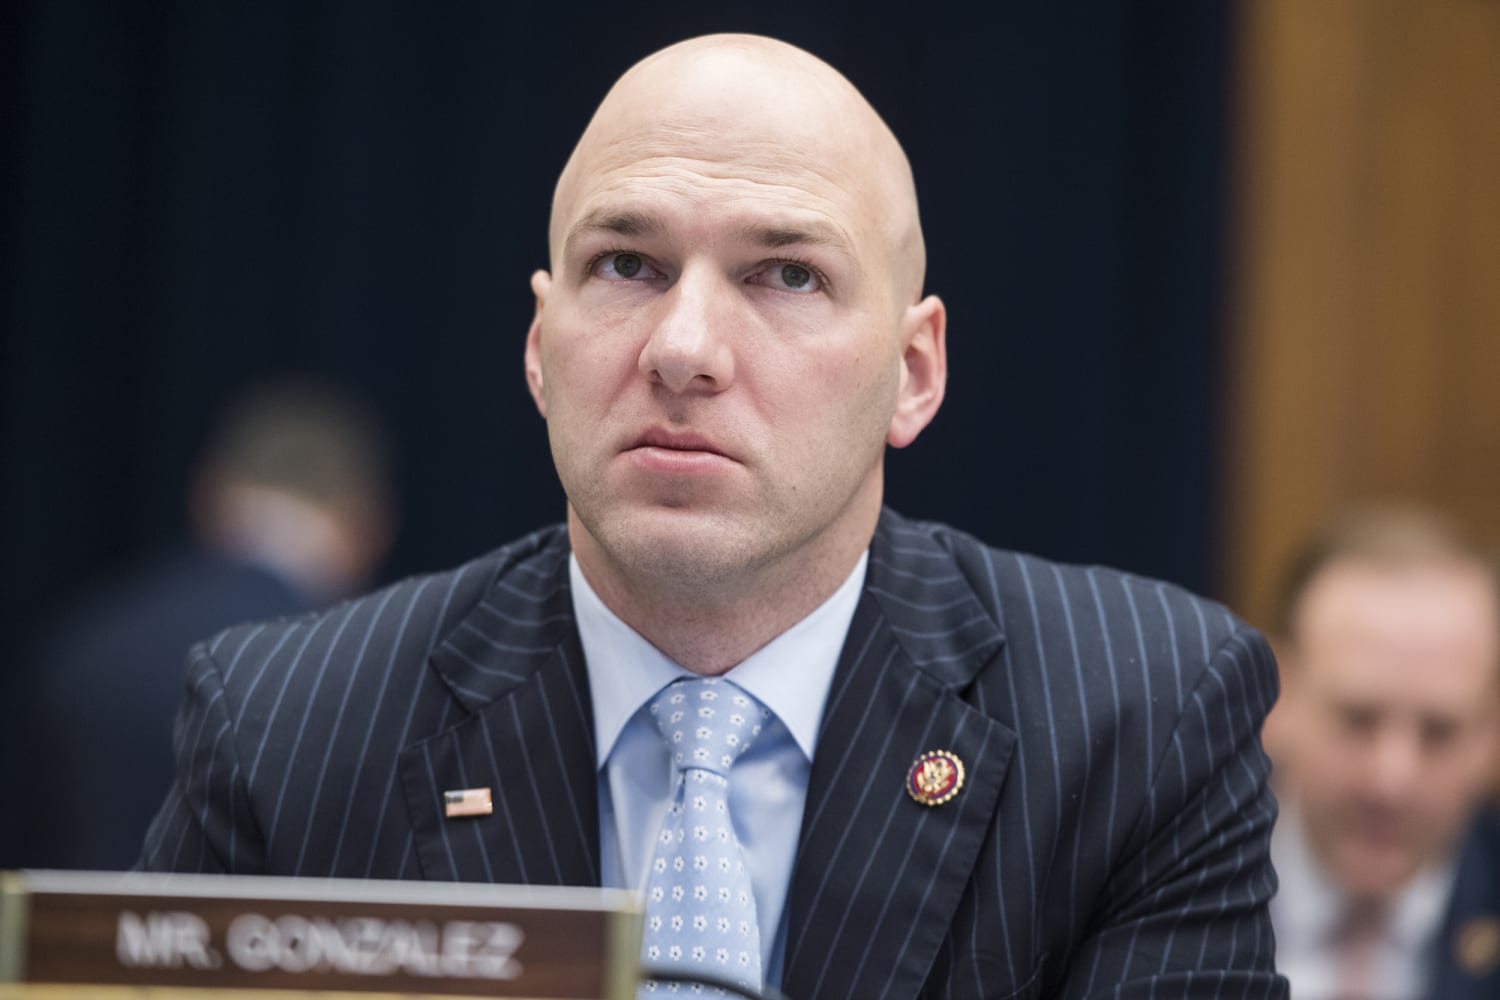 Ohio Rep. Anthony Gonzalez, a Republican who voted to impeach Trump, won&#39;t  seek re-election